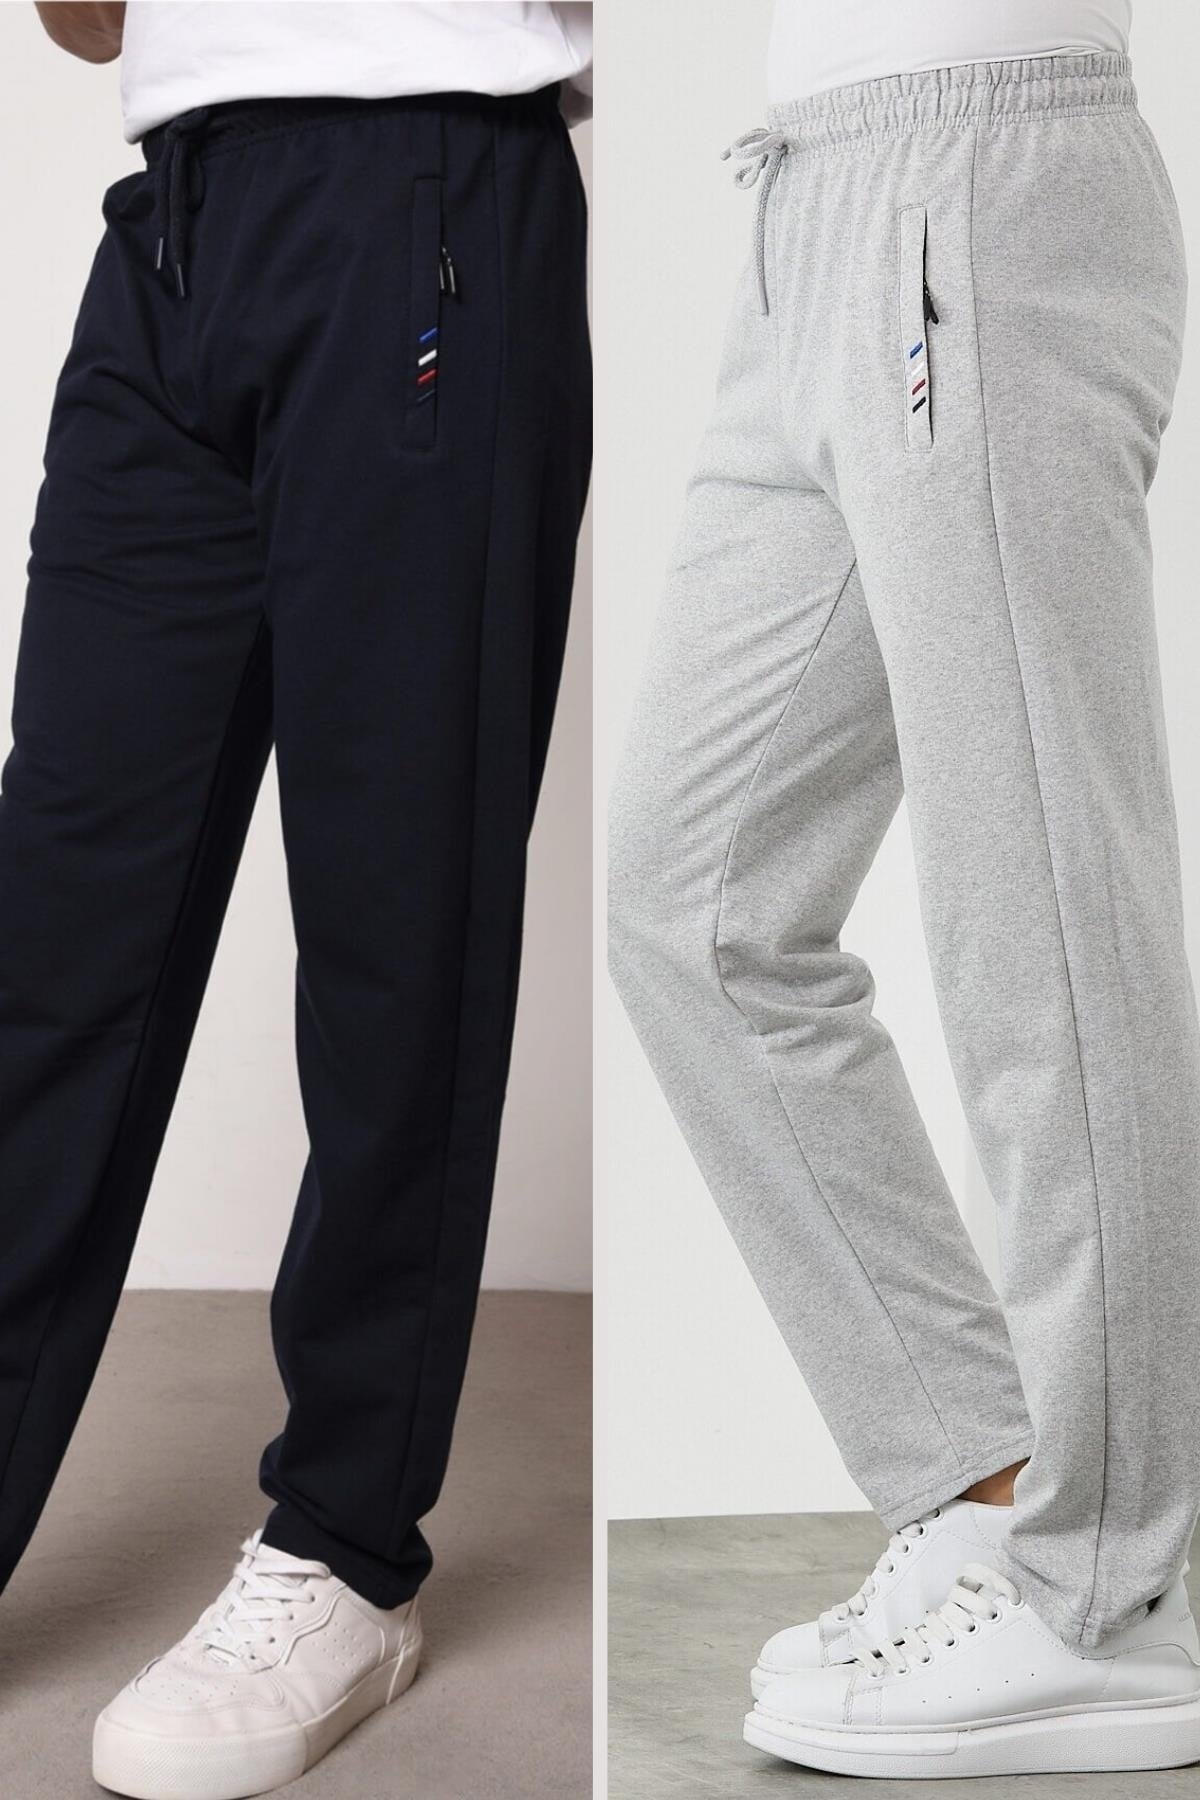 Navy Blue-Grey Men's Zipper Pocket Embroidery Detailed Straight Leg Relaxed Cut 2-Pack of Sweatpants